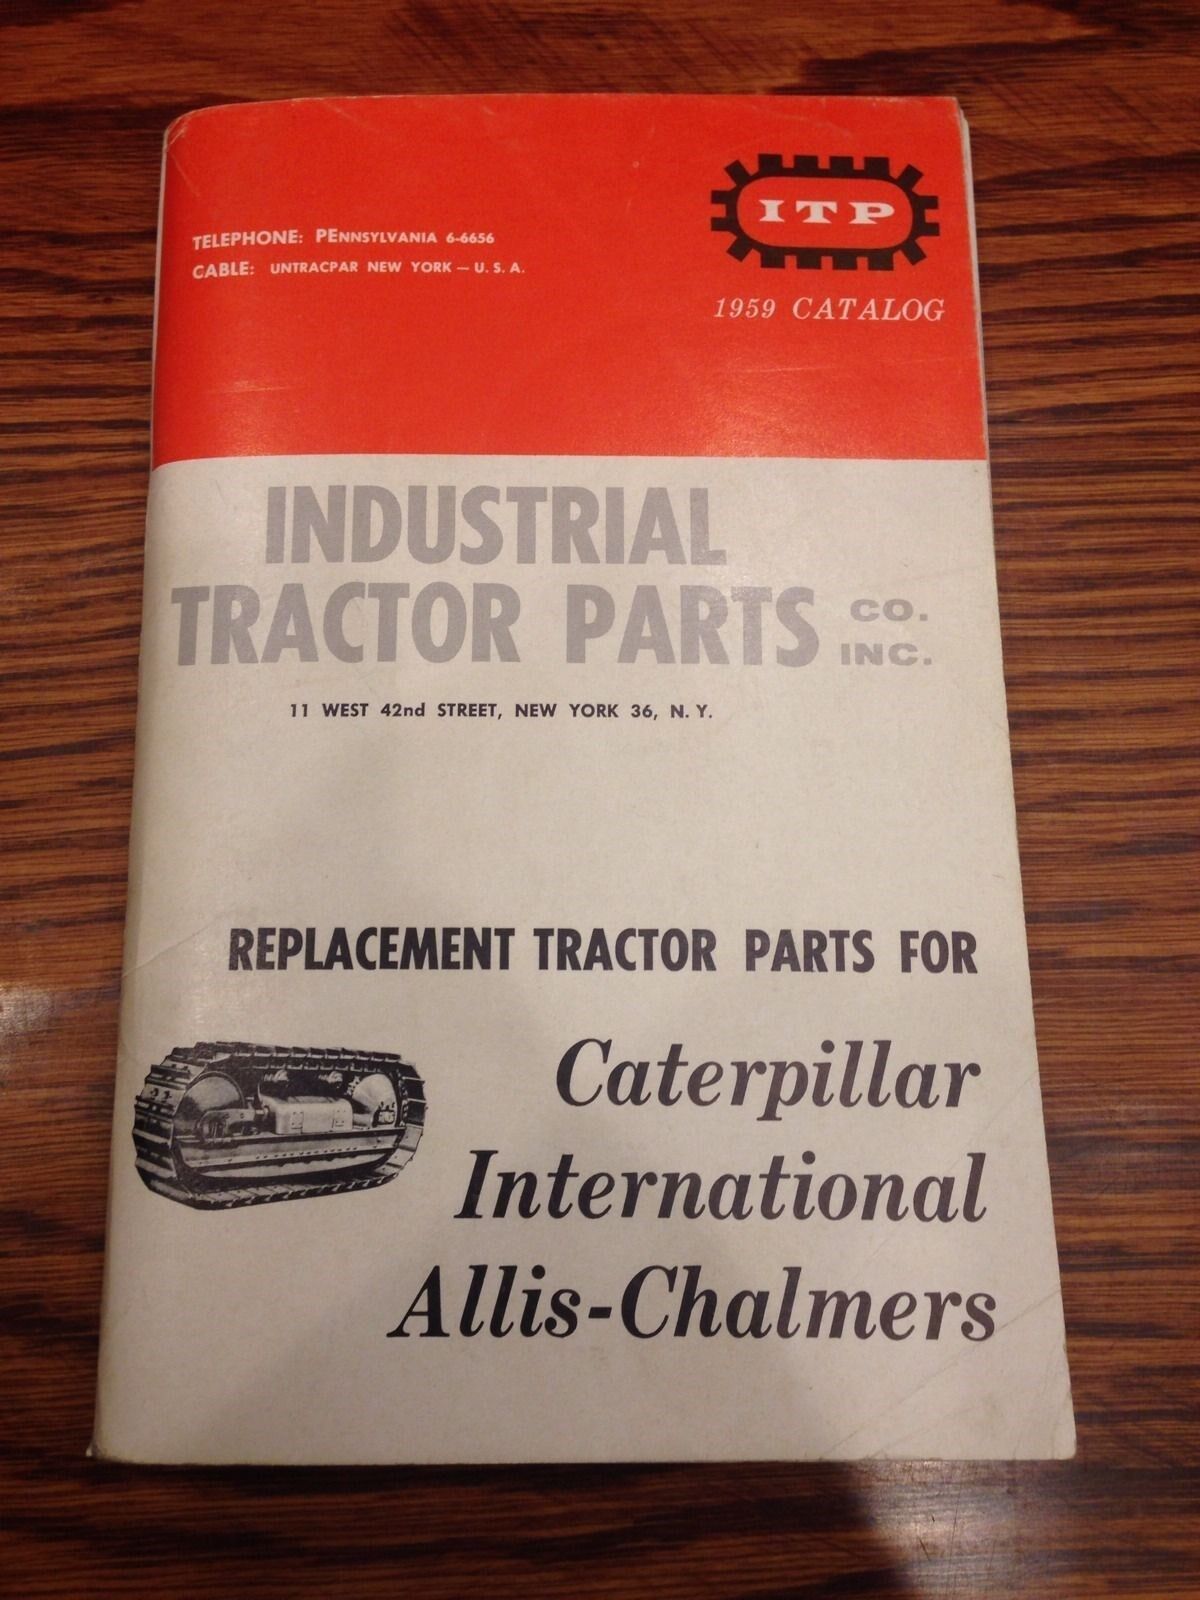 Vintage 1959 Industrial Tractor Parts Catalog And Price List. Includes Letter